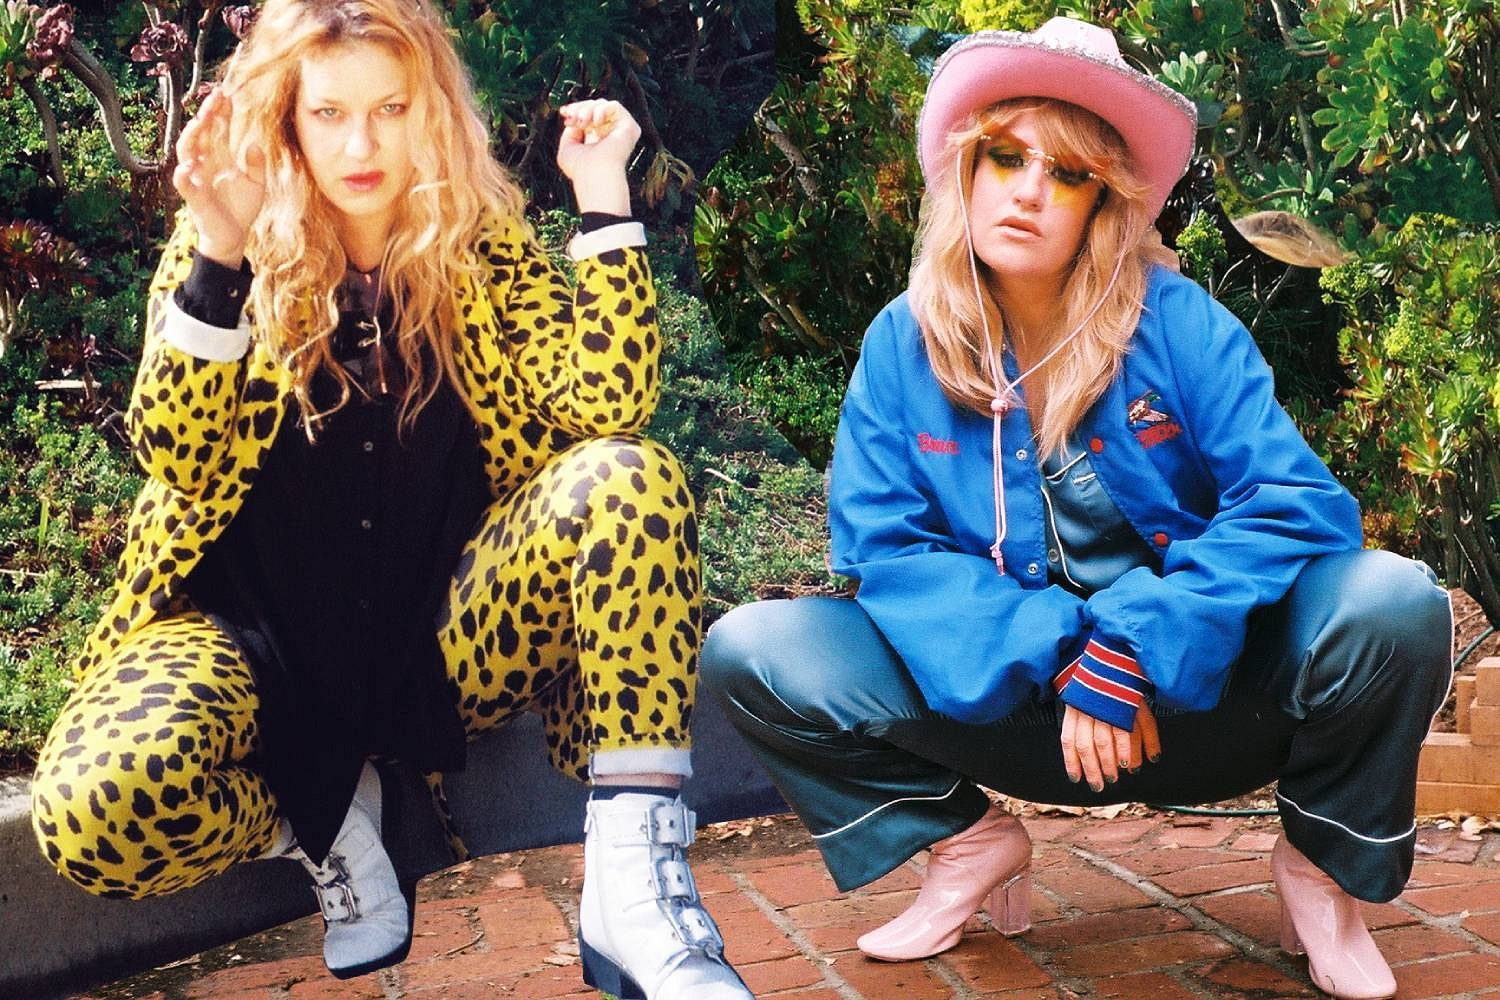 Deap Vally announce new album ‘Marriage’